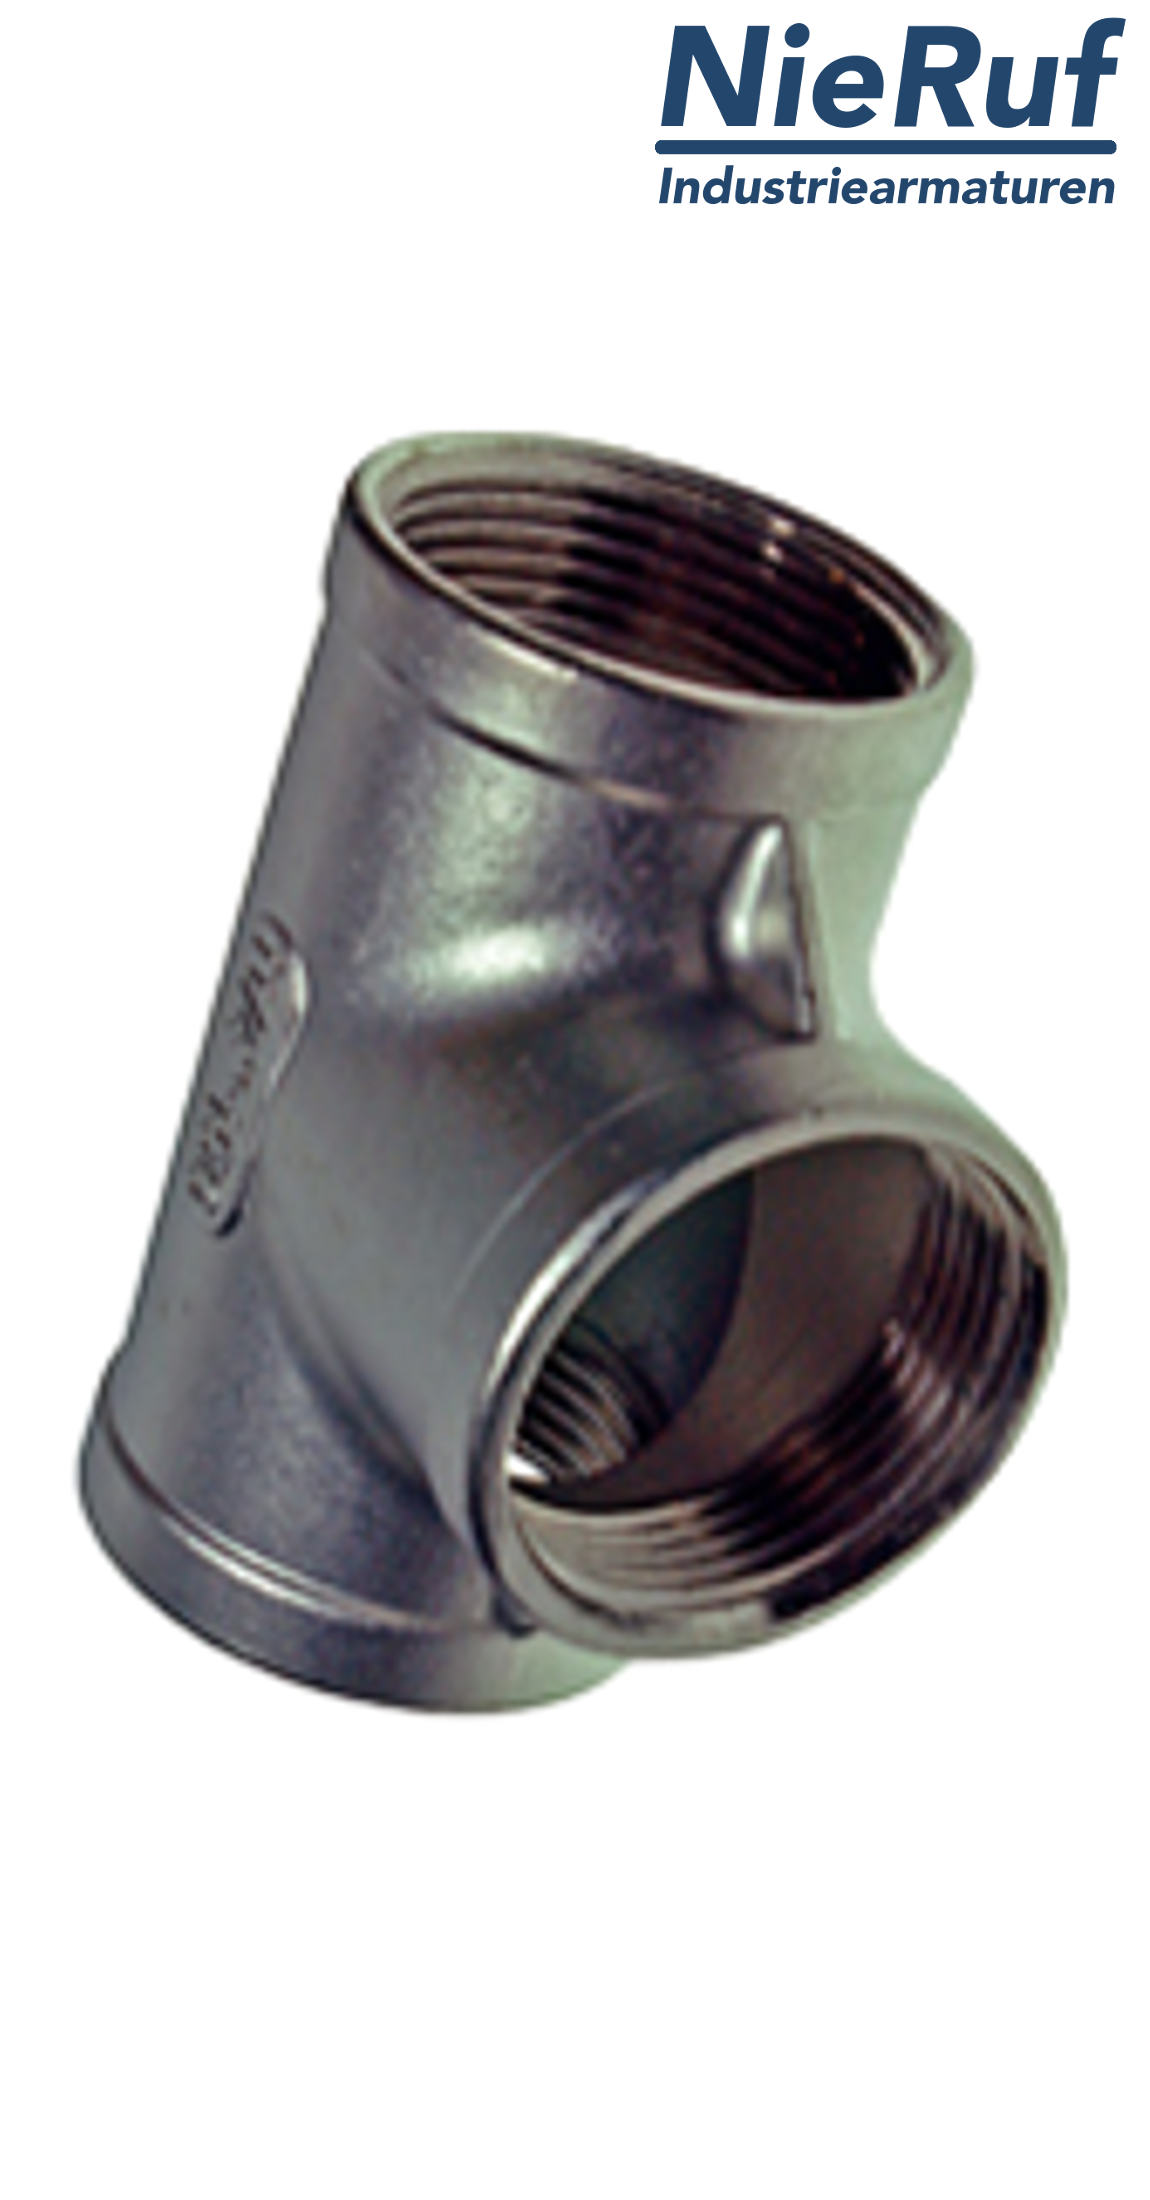 T-fitting 3/4" inch NPT stainless steel 316 90° angle FM